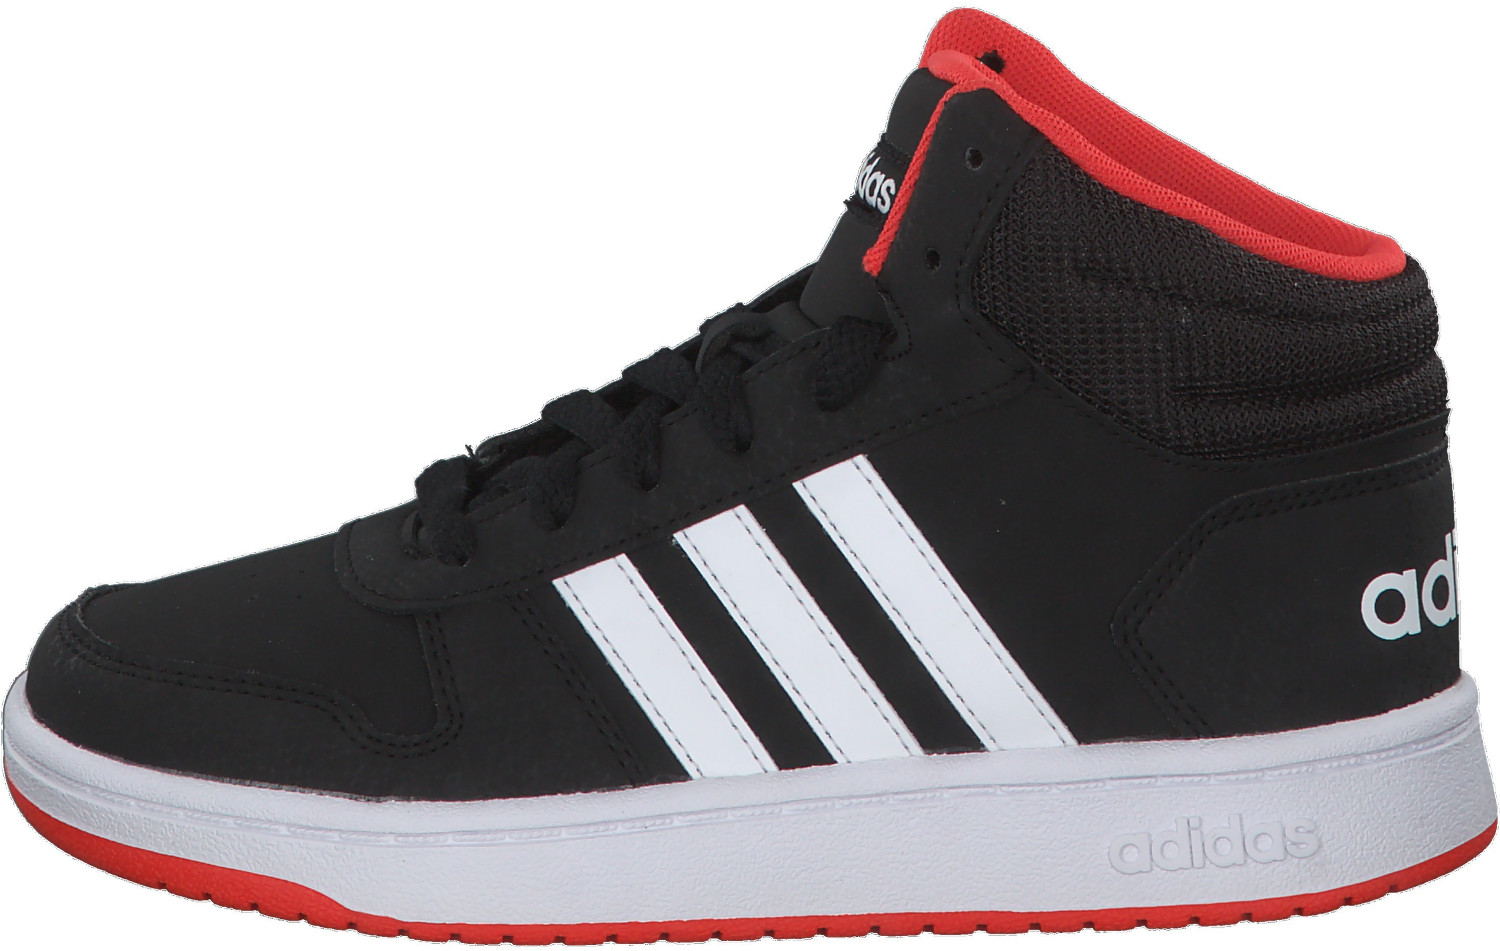 Adidas Hoops Mid 2.0 K core black/ftwr white/hi-res red